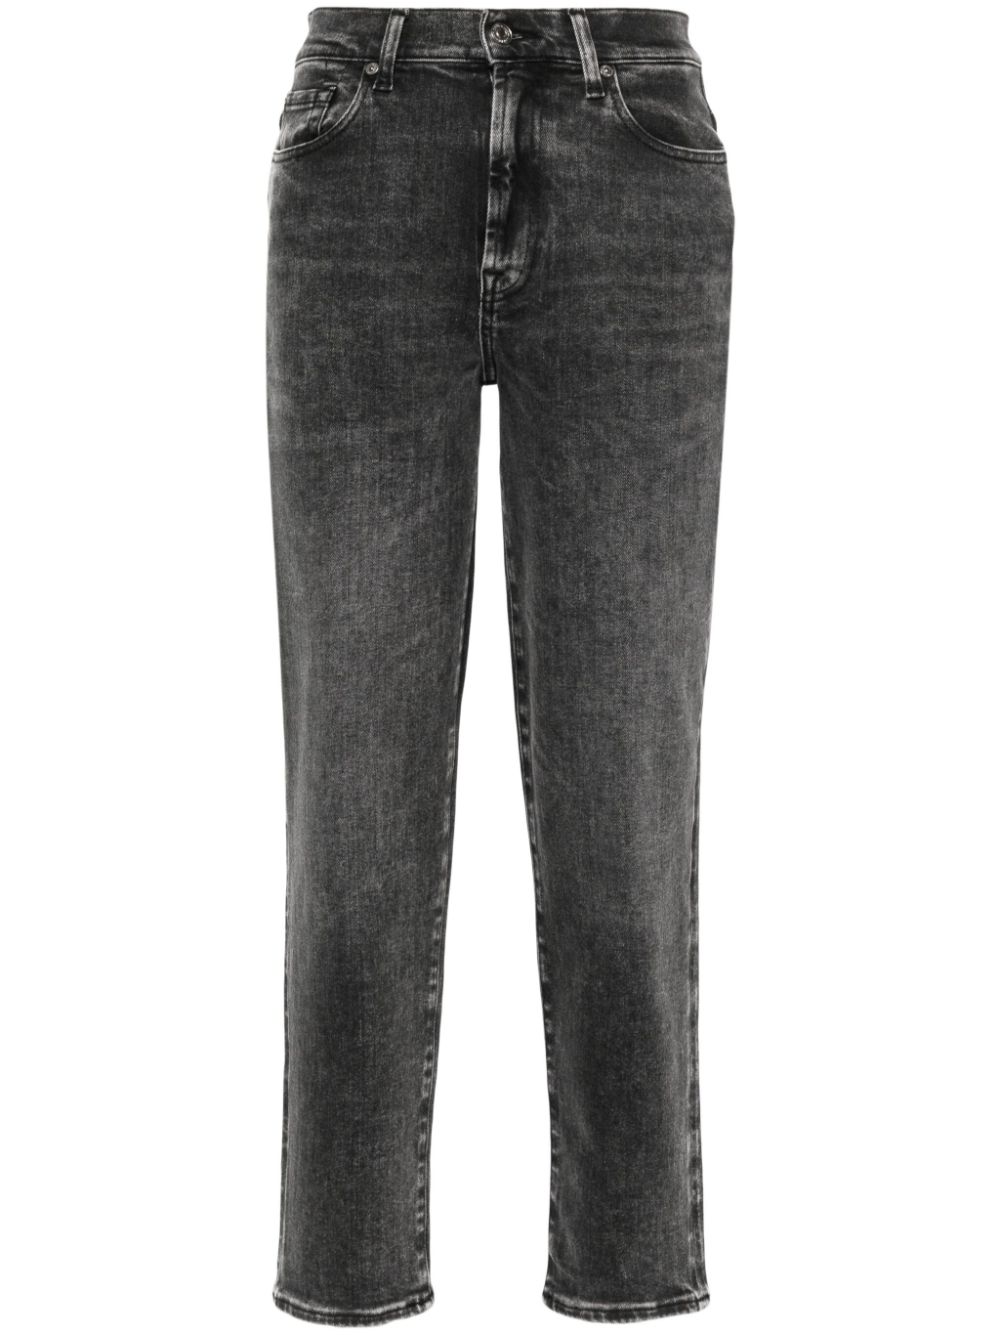 7 For All Mankind 7 FOR ALL MANKIND- Malia Luxe Denim Jeans